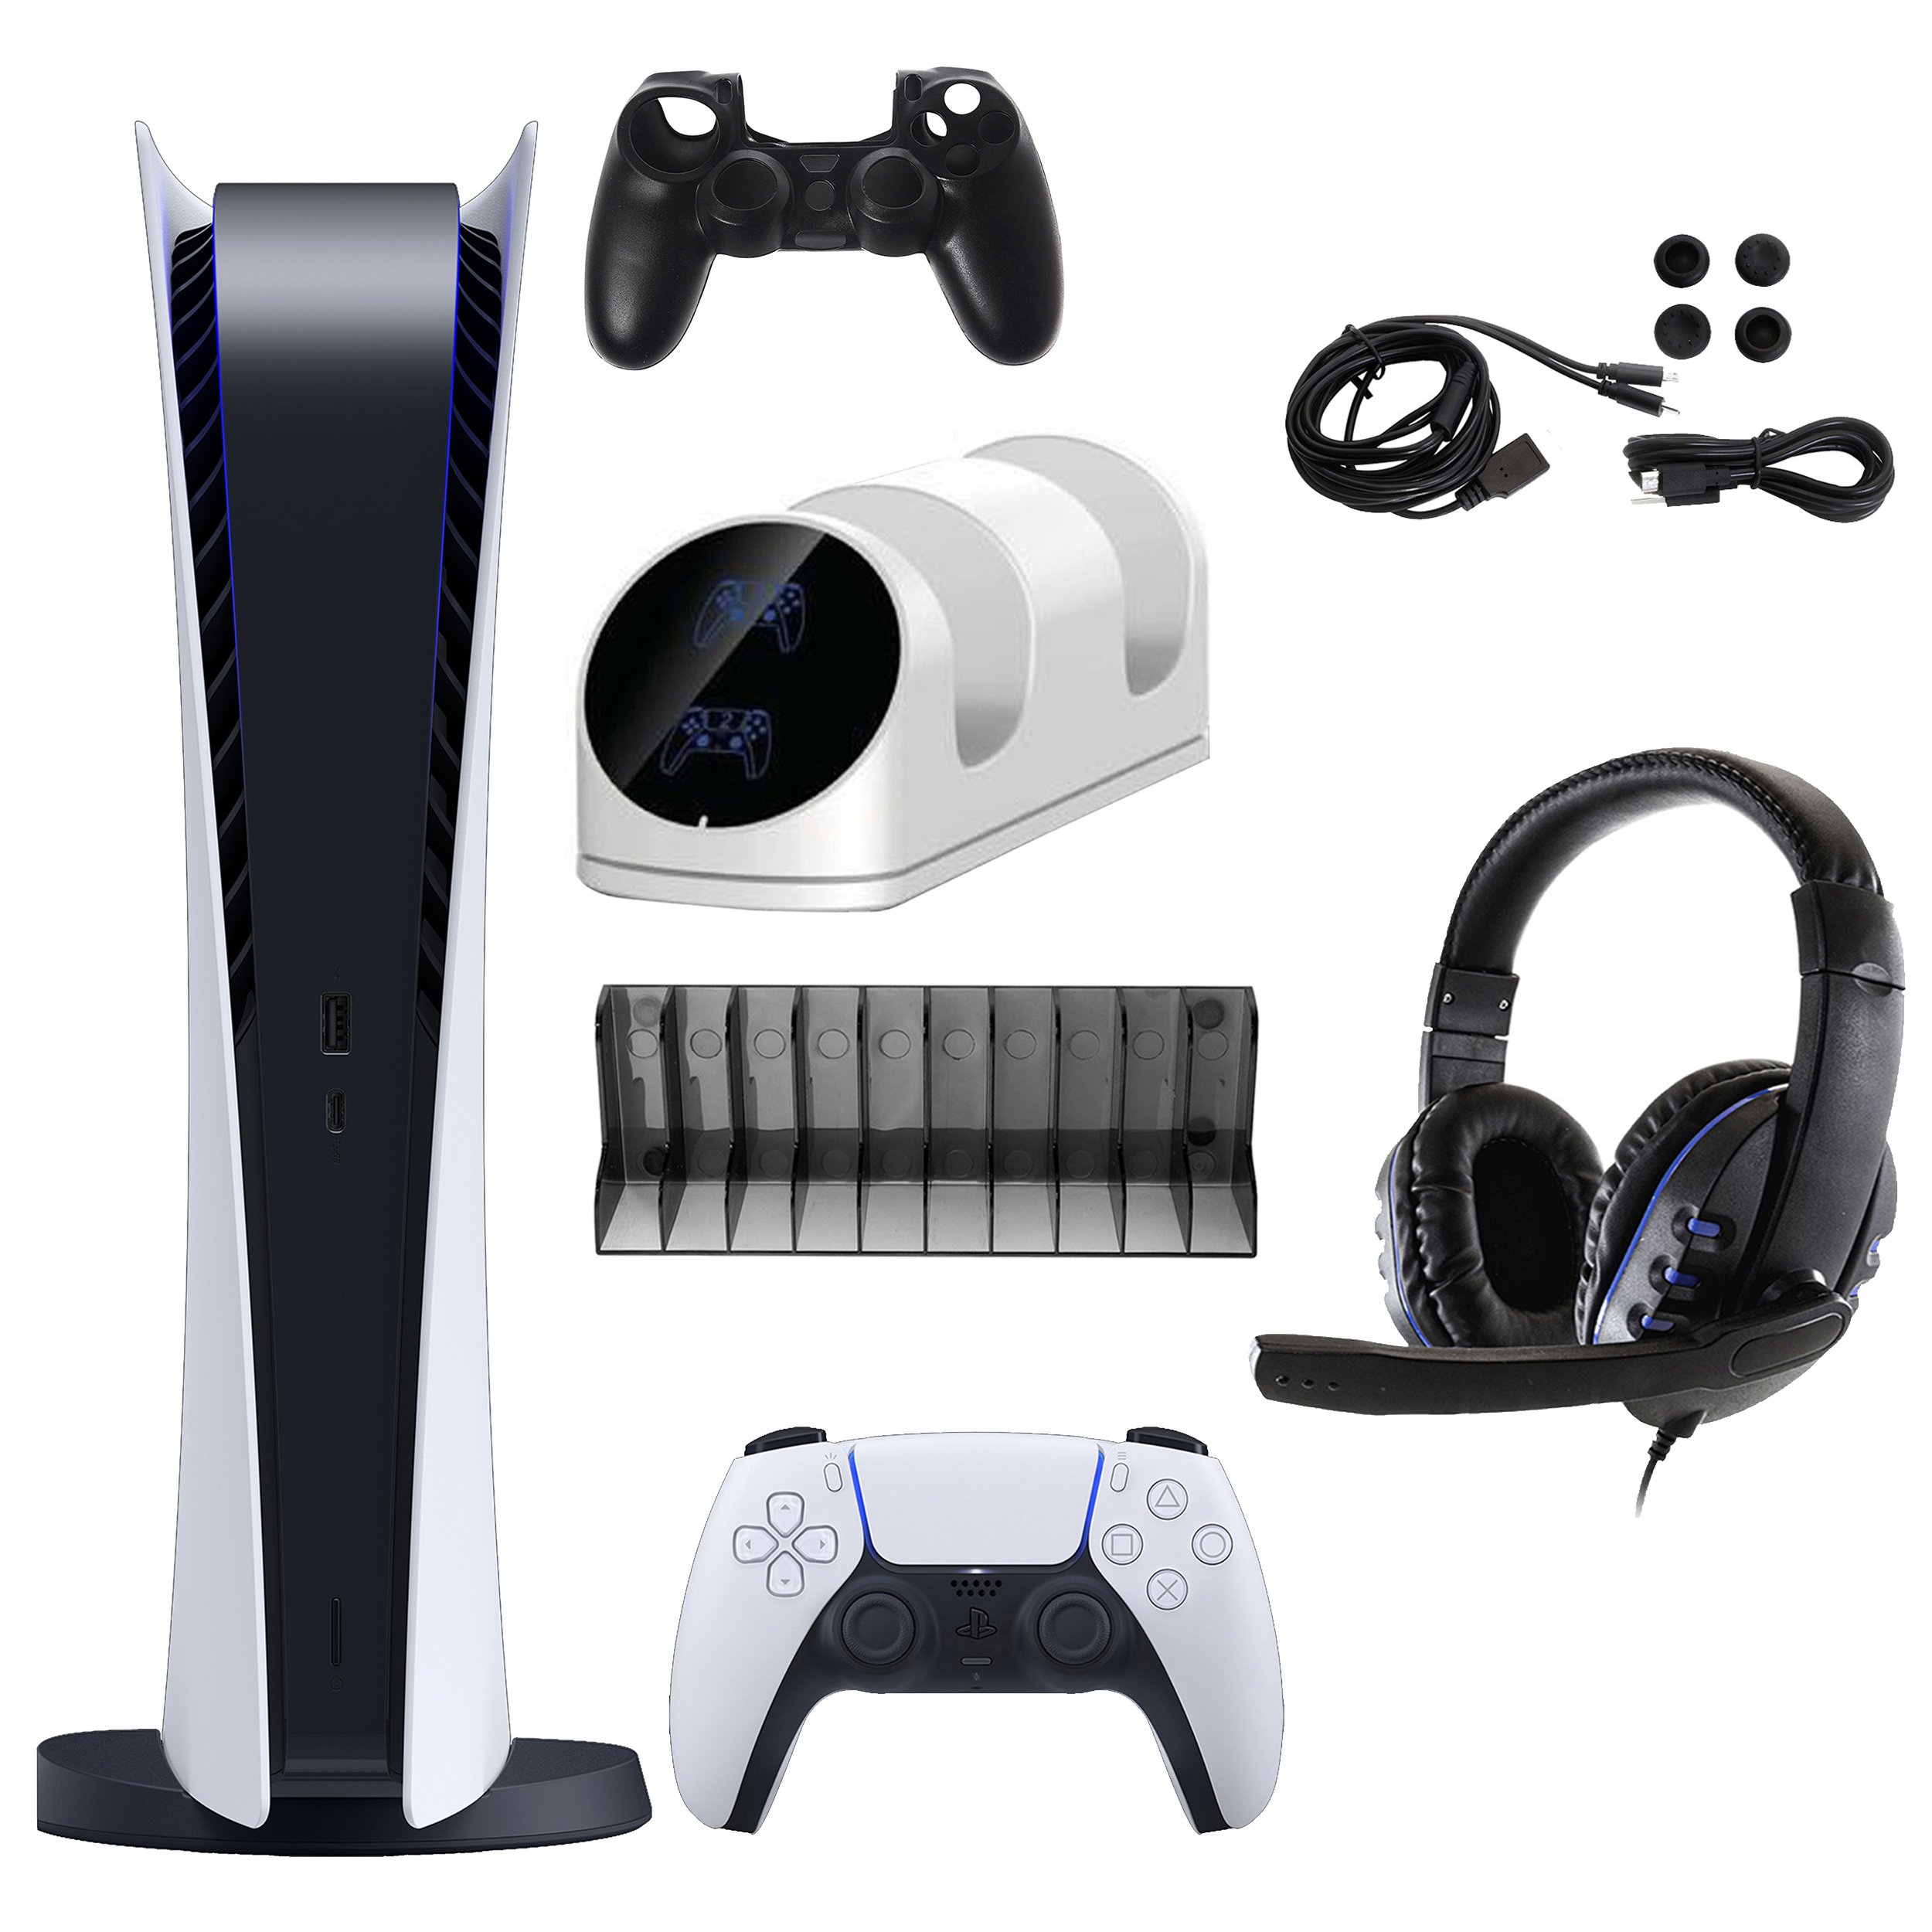 Sony PlayStation 5 Digital Console with Accessories Kit